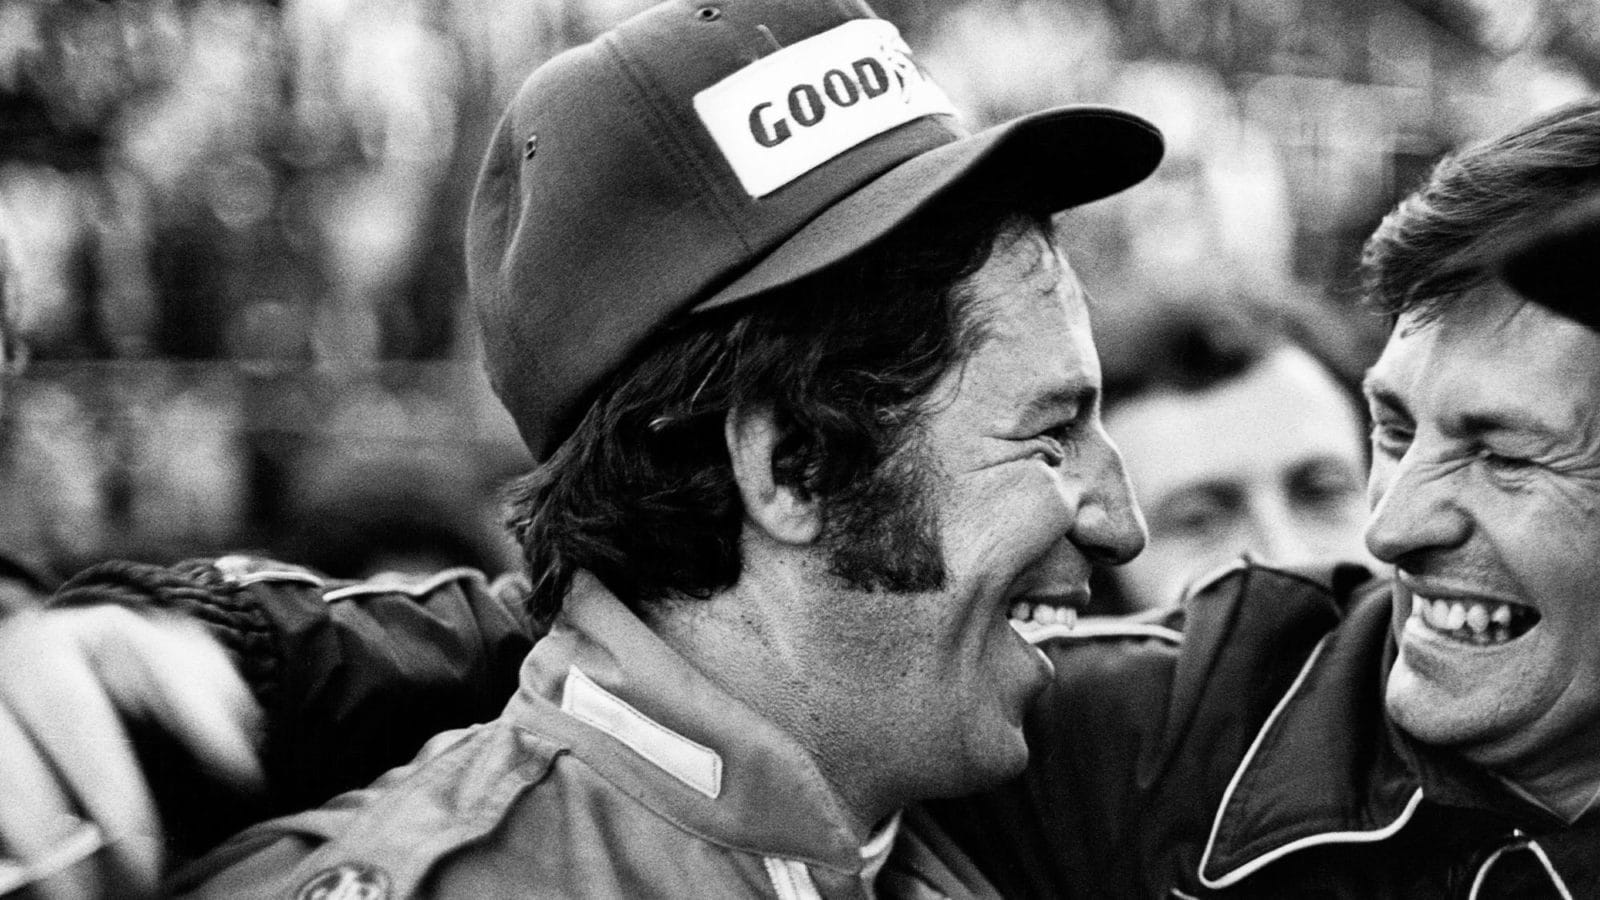 Mario Andretti, Tony Southgate, Lotus-Ford 77, Grand Prix of Japan, Fuji Speedway, 24 October 1976. Mario Andretti celebrating victory with Lotus engineer Tony Southgate who co-designed the Lotus 77 and Lotus 78 with Peter Wright. (Photo by Bernard Cahier/Getty Images)